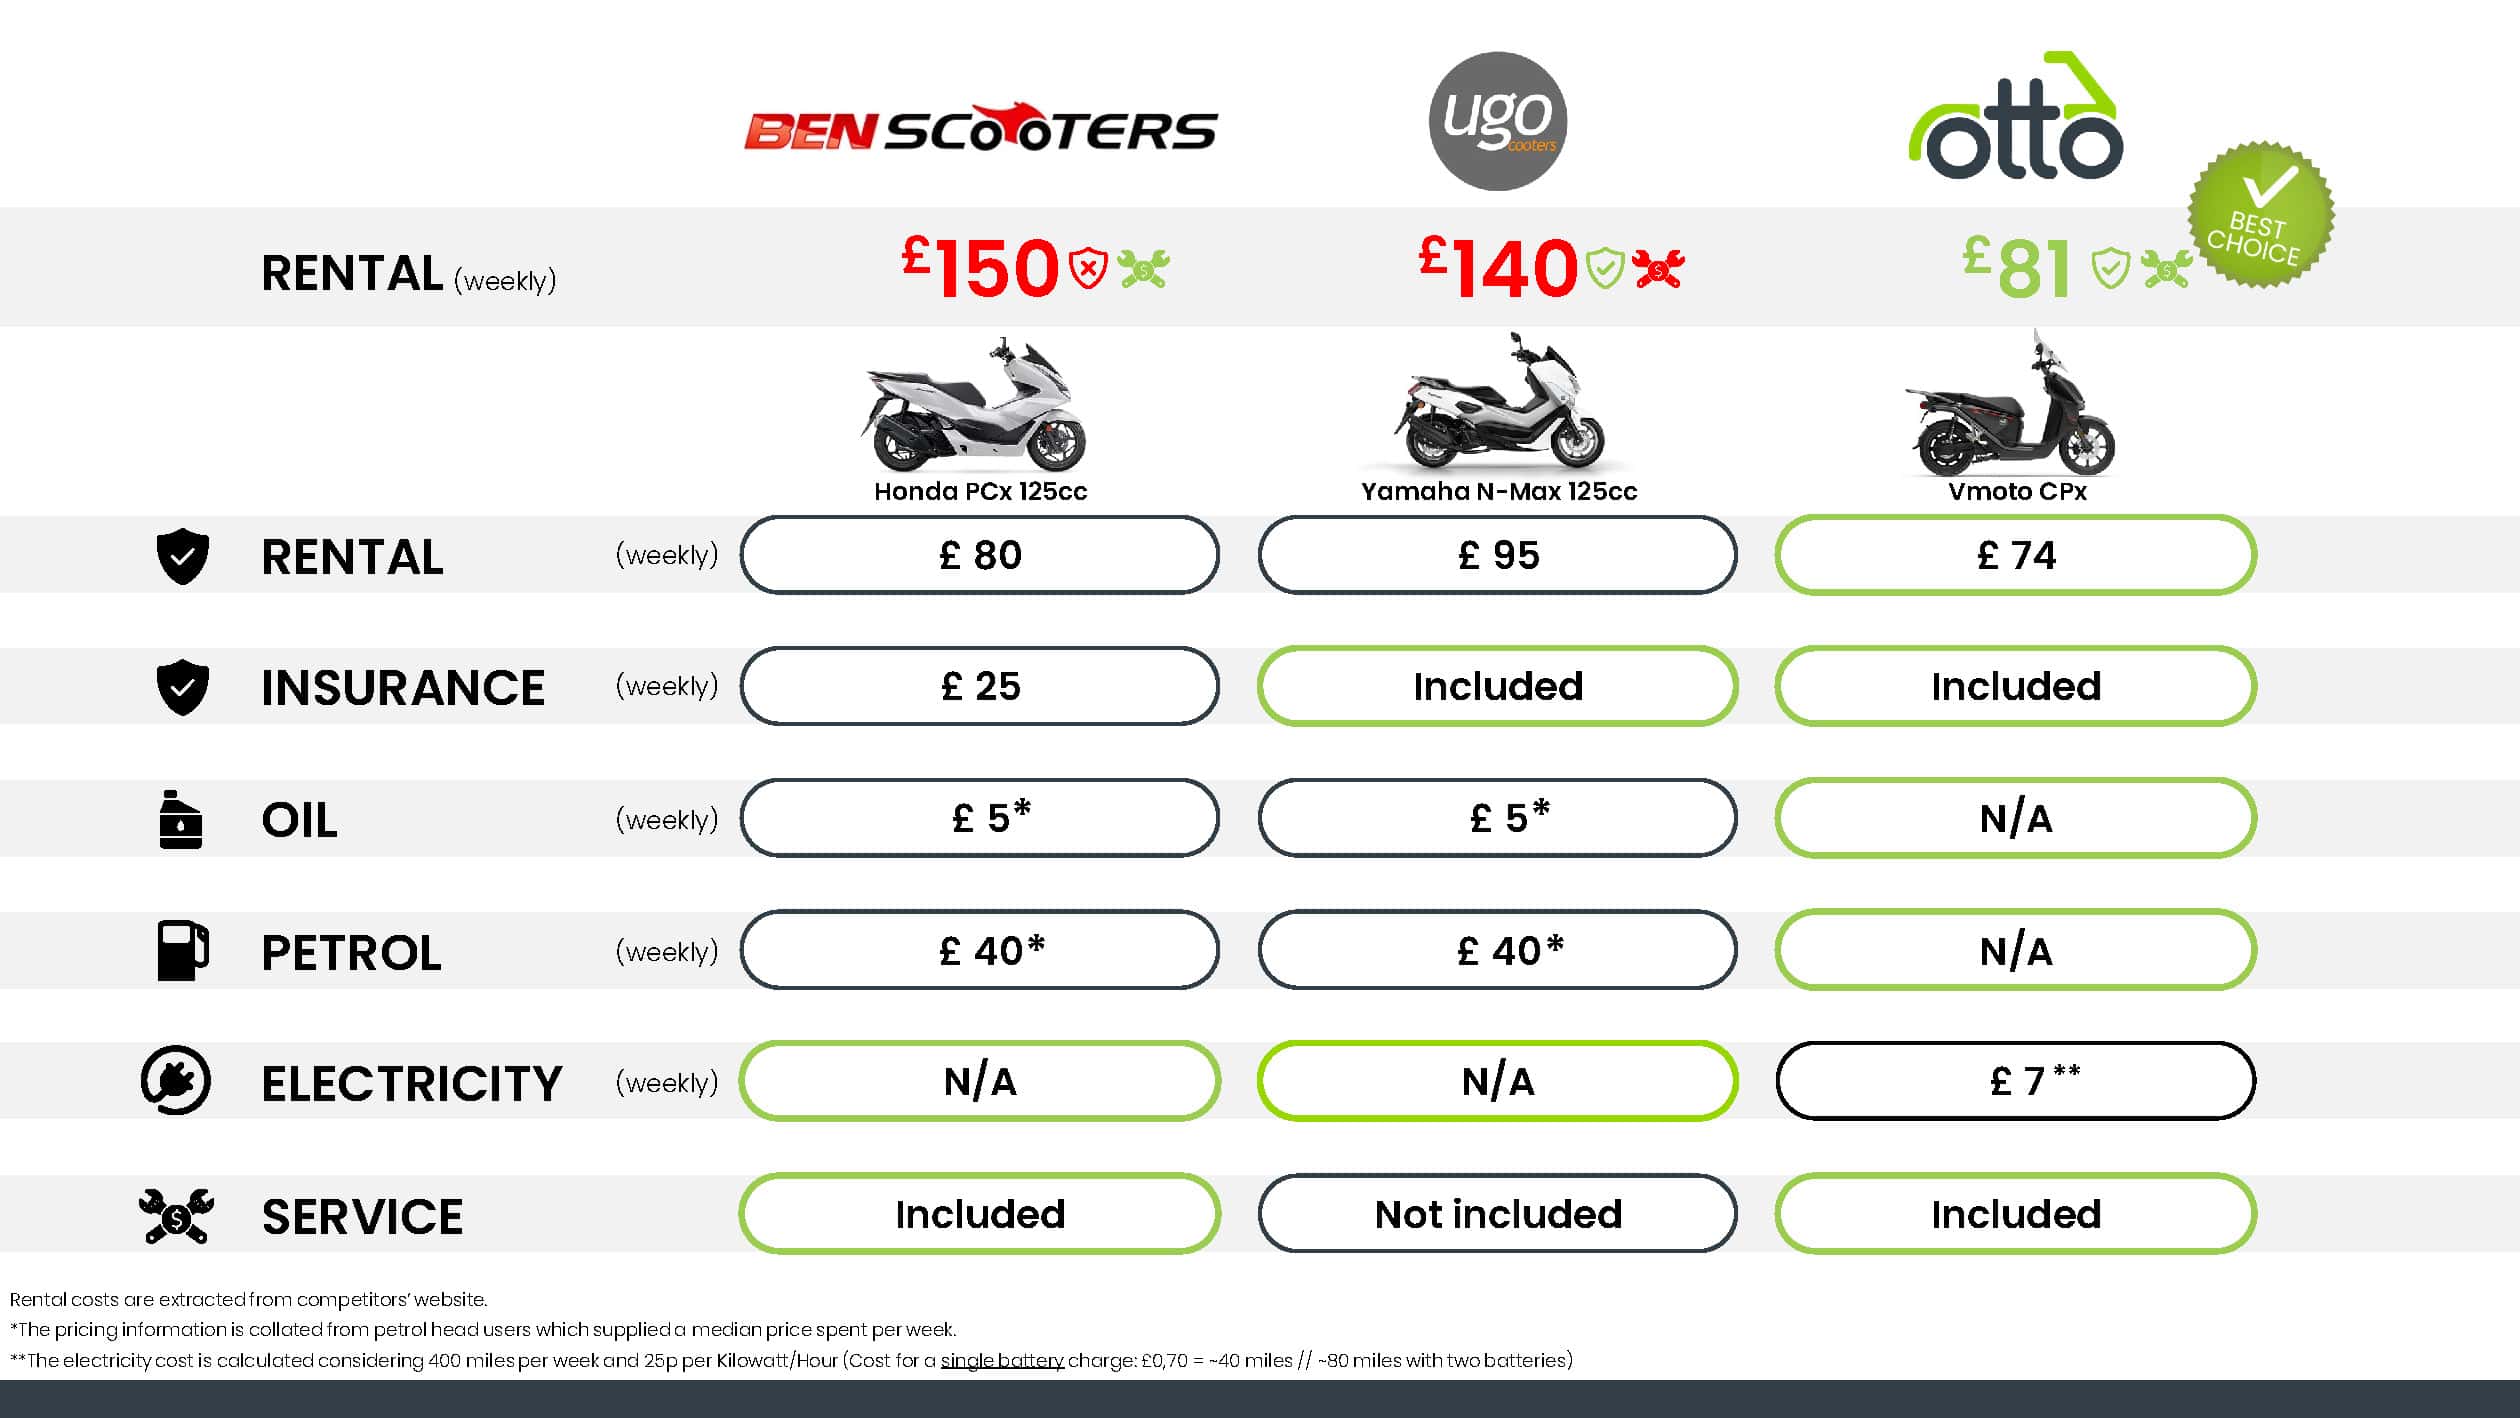 Price comparison sheet for Otto Scooter versus competitors, showing the savings at Otto Scooter